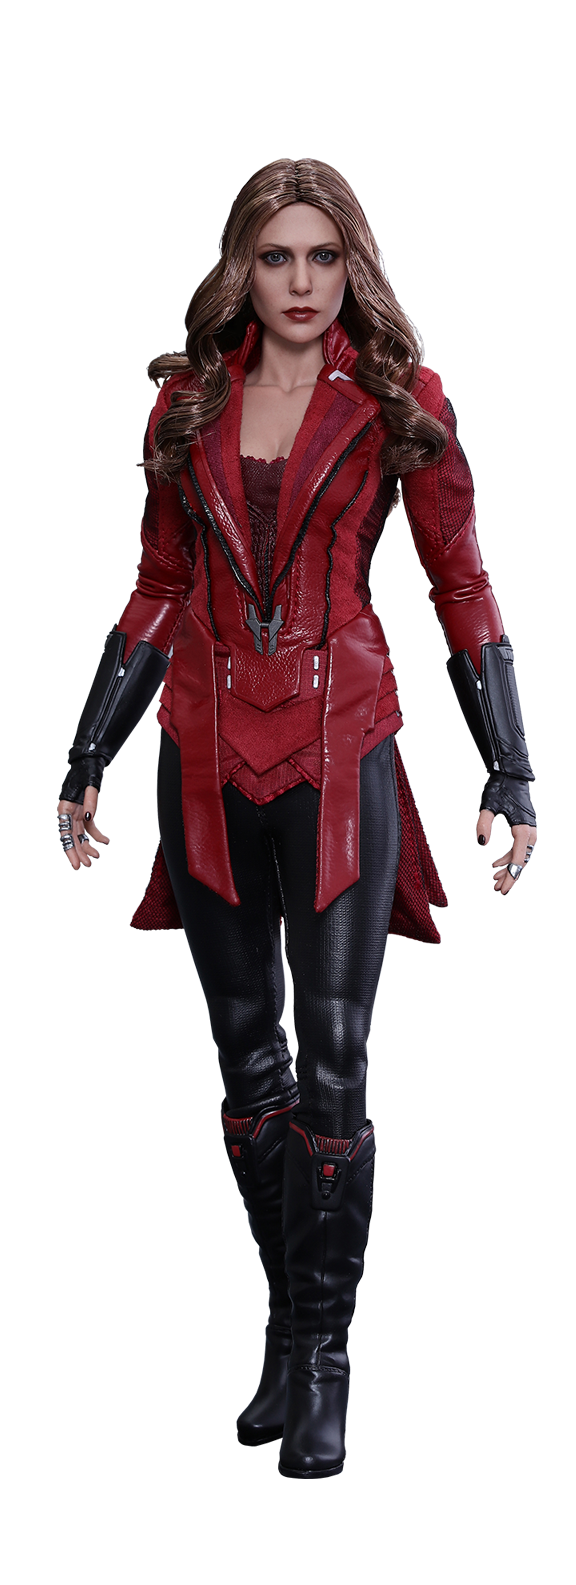 Scarlet Witch PNG High Definition Photo Image pngteam.com